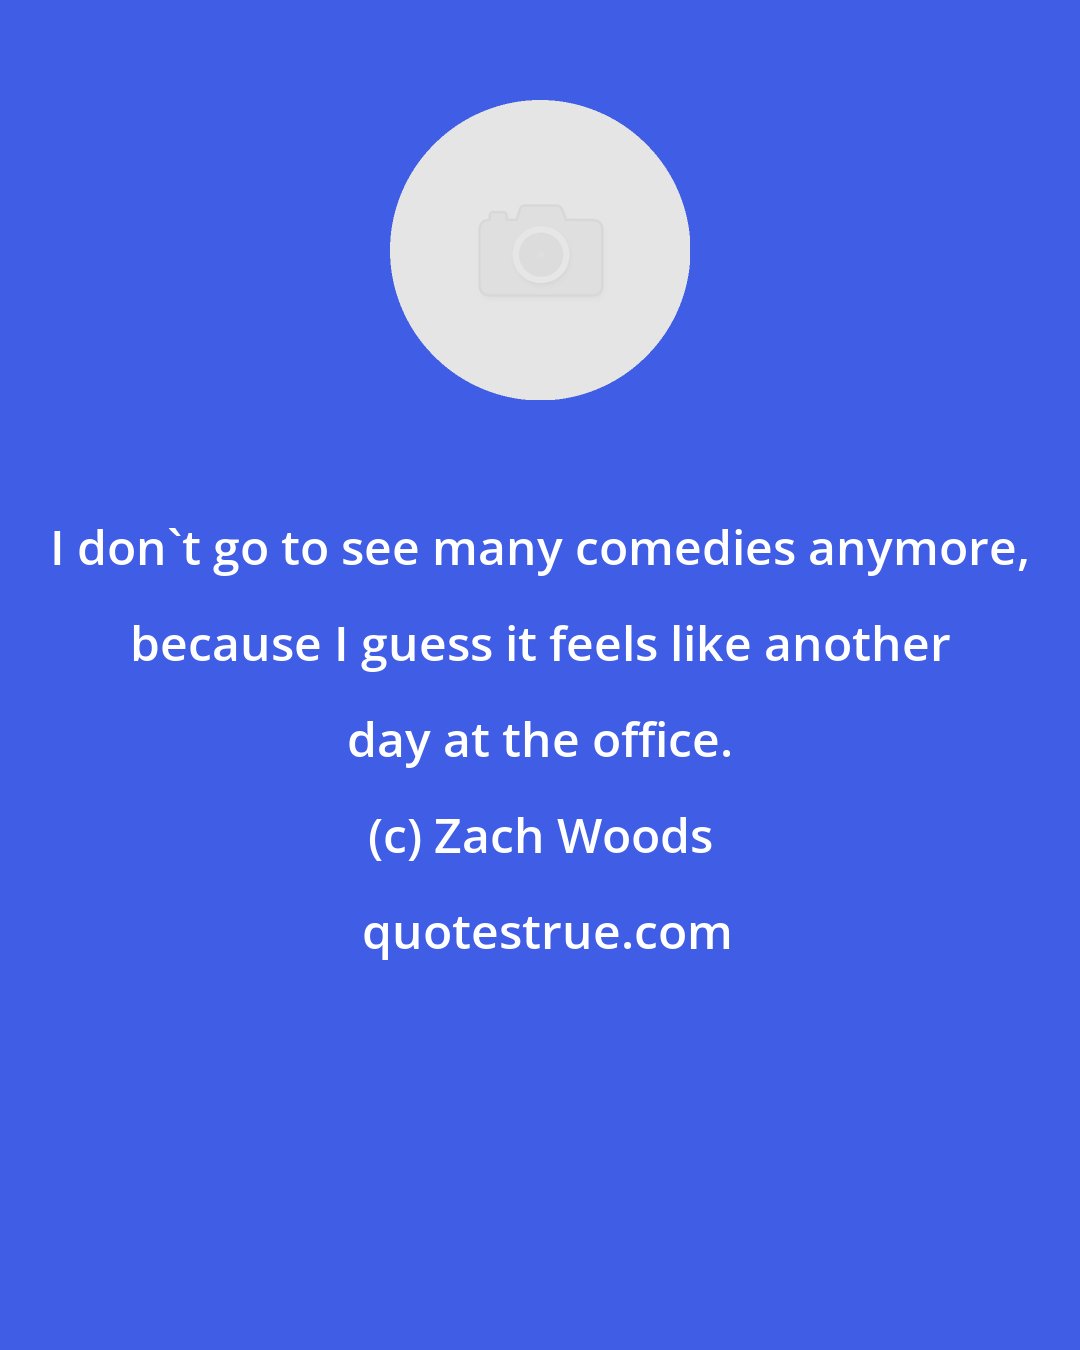 Zach Woods: I don't go to see many comedies anymore, because I guess it feels like another day at the office.